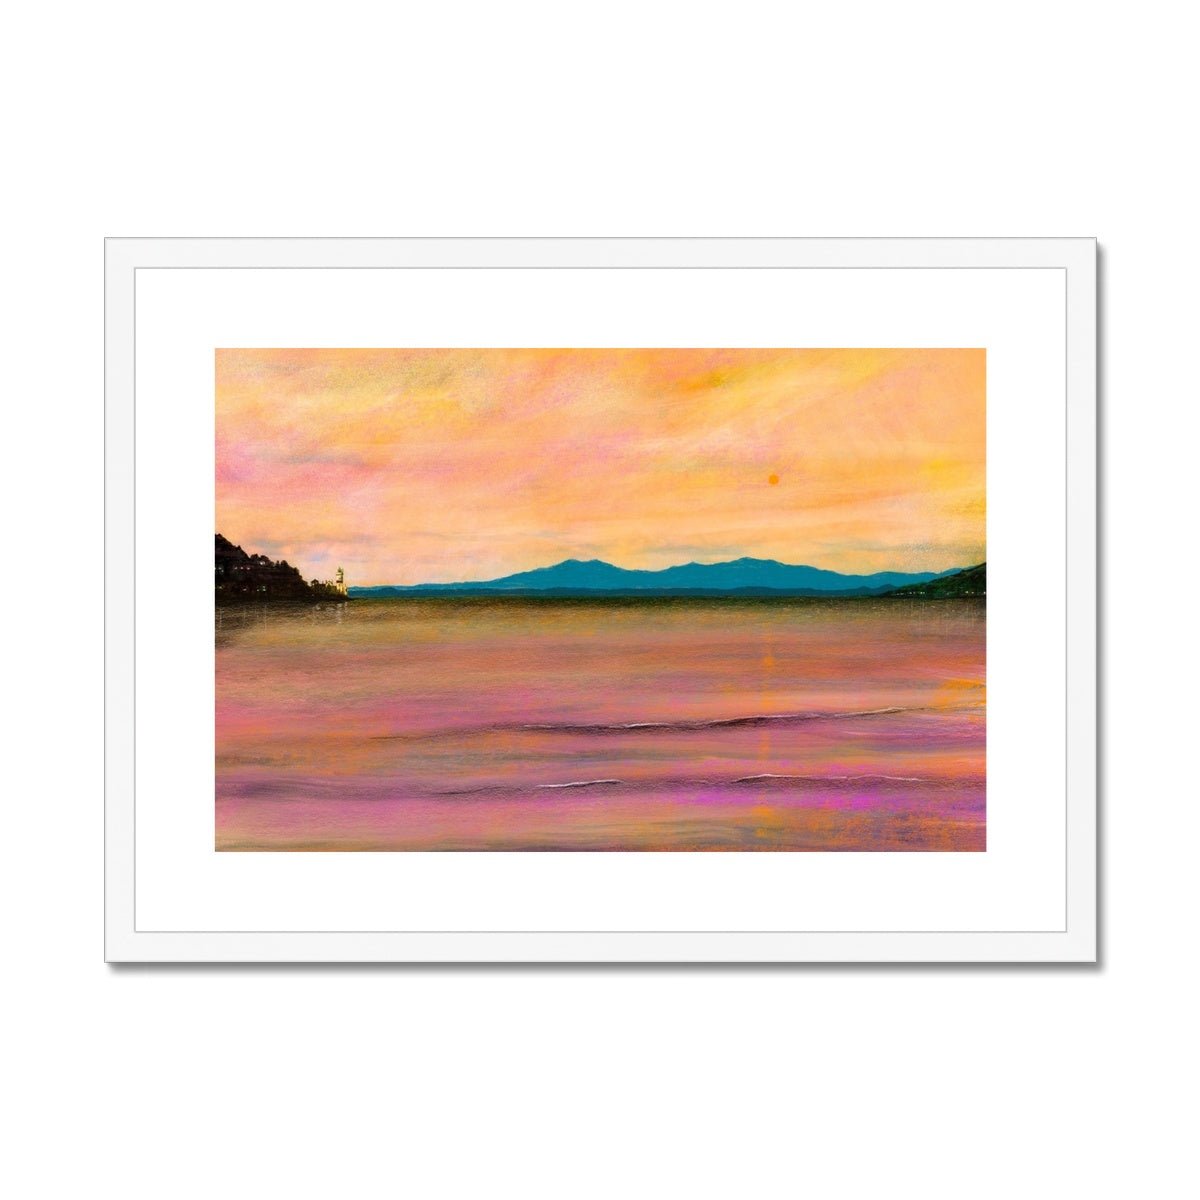 Dusk Over Arran & The Cloch Lighthouse Painting | Framed & Mounted Prints From Scotland-Framed & Mounted Prints-Arran Art Gallery-A2 Landscape-White Frame-Paintings, Prints, Homeware, Art Gifts From Scotland By Scottish Artist Kevin Hunter